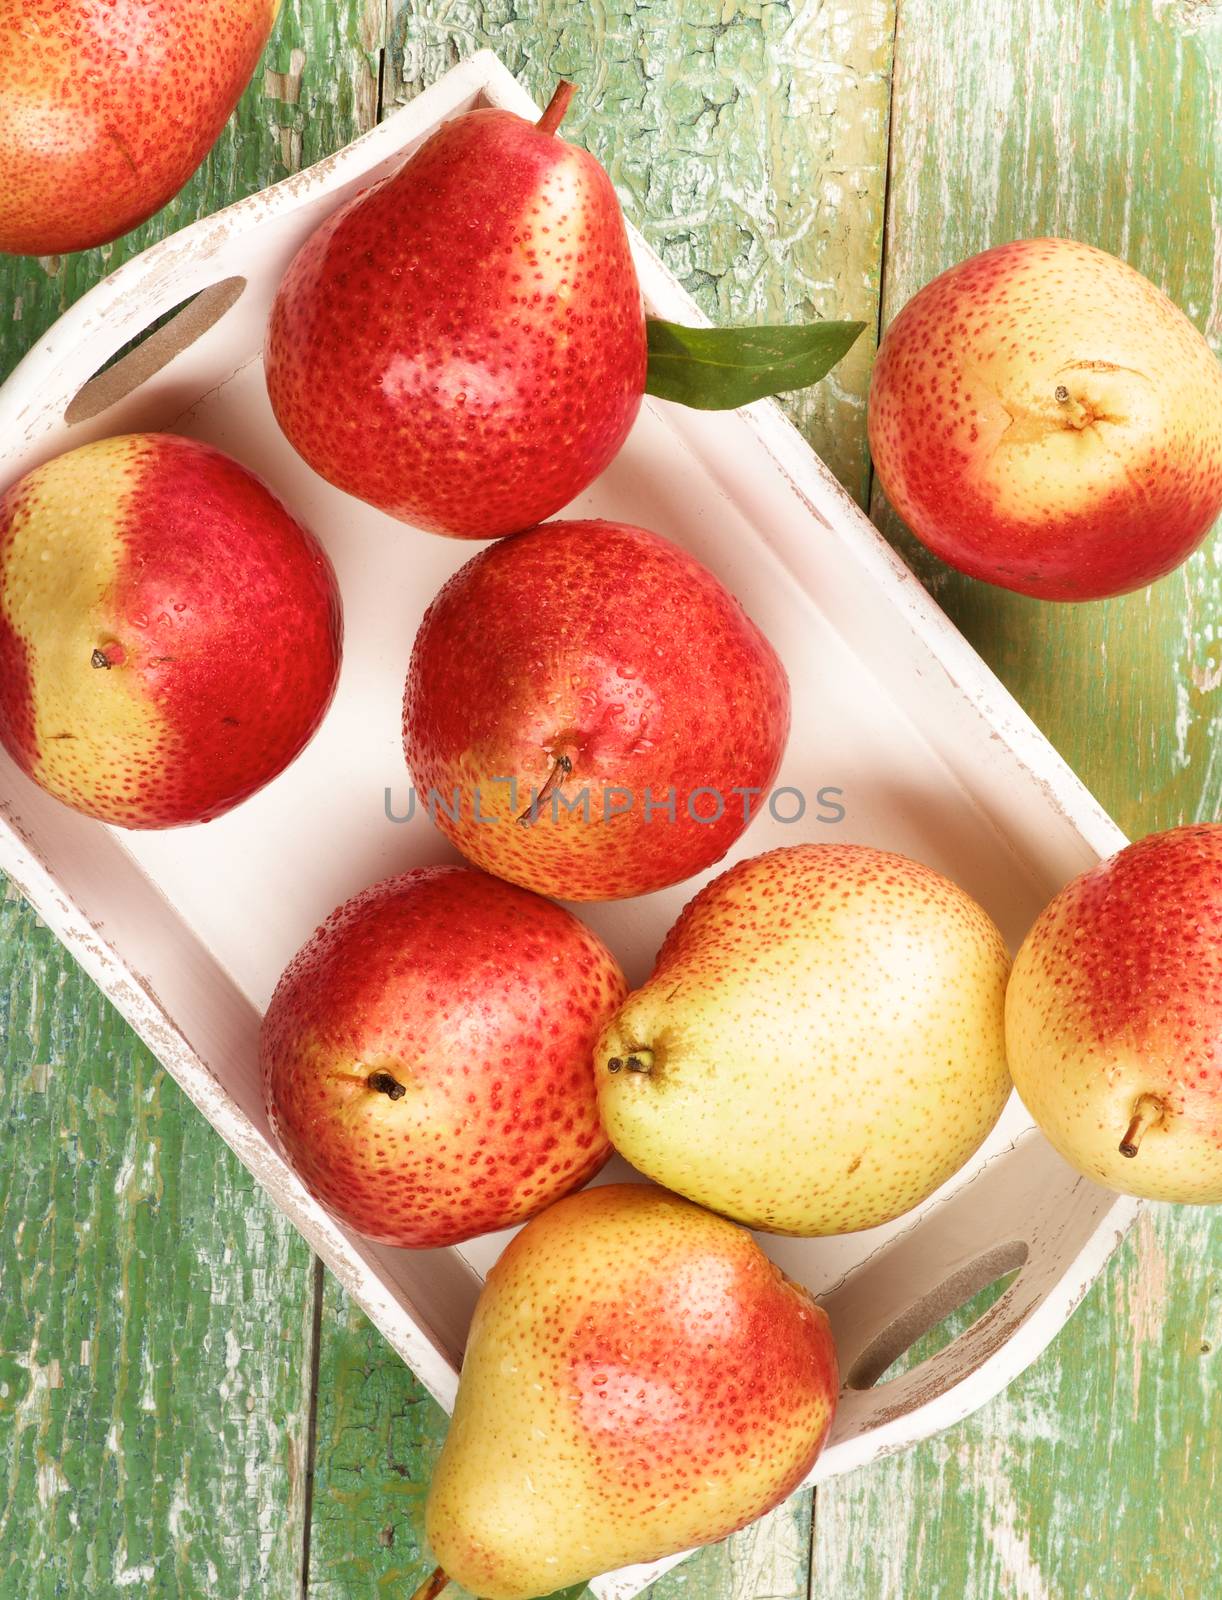 Arrangement of Ripe Yellow and Red Pears with Leafs in White Wooden Tray closeup on Green Wooden background. Top View